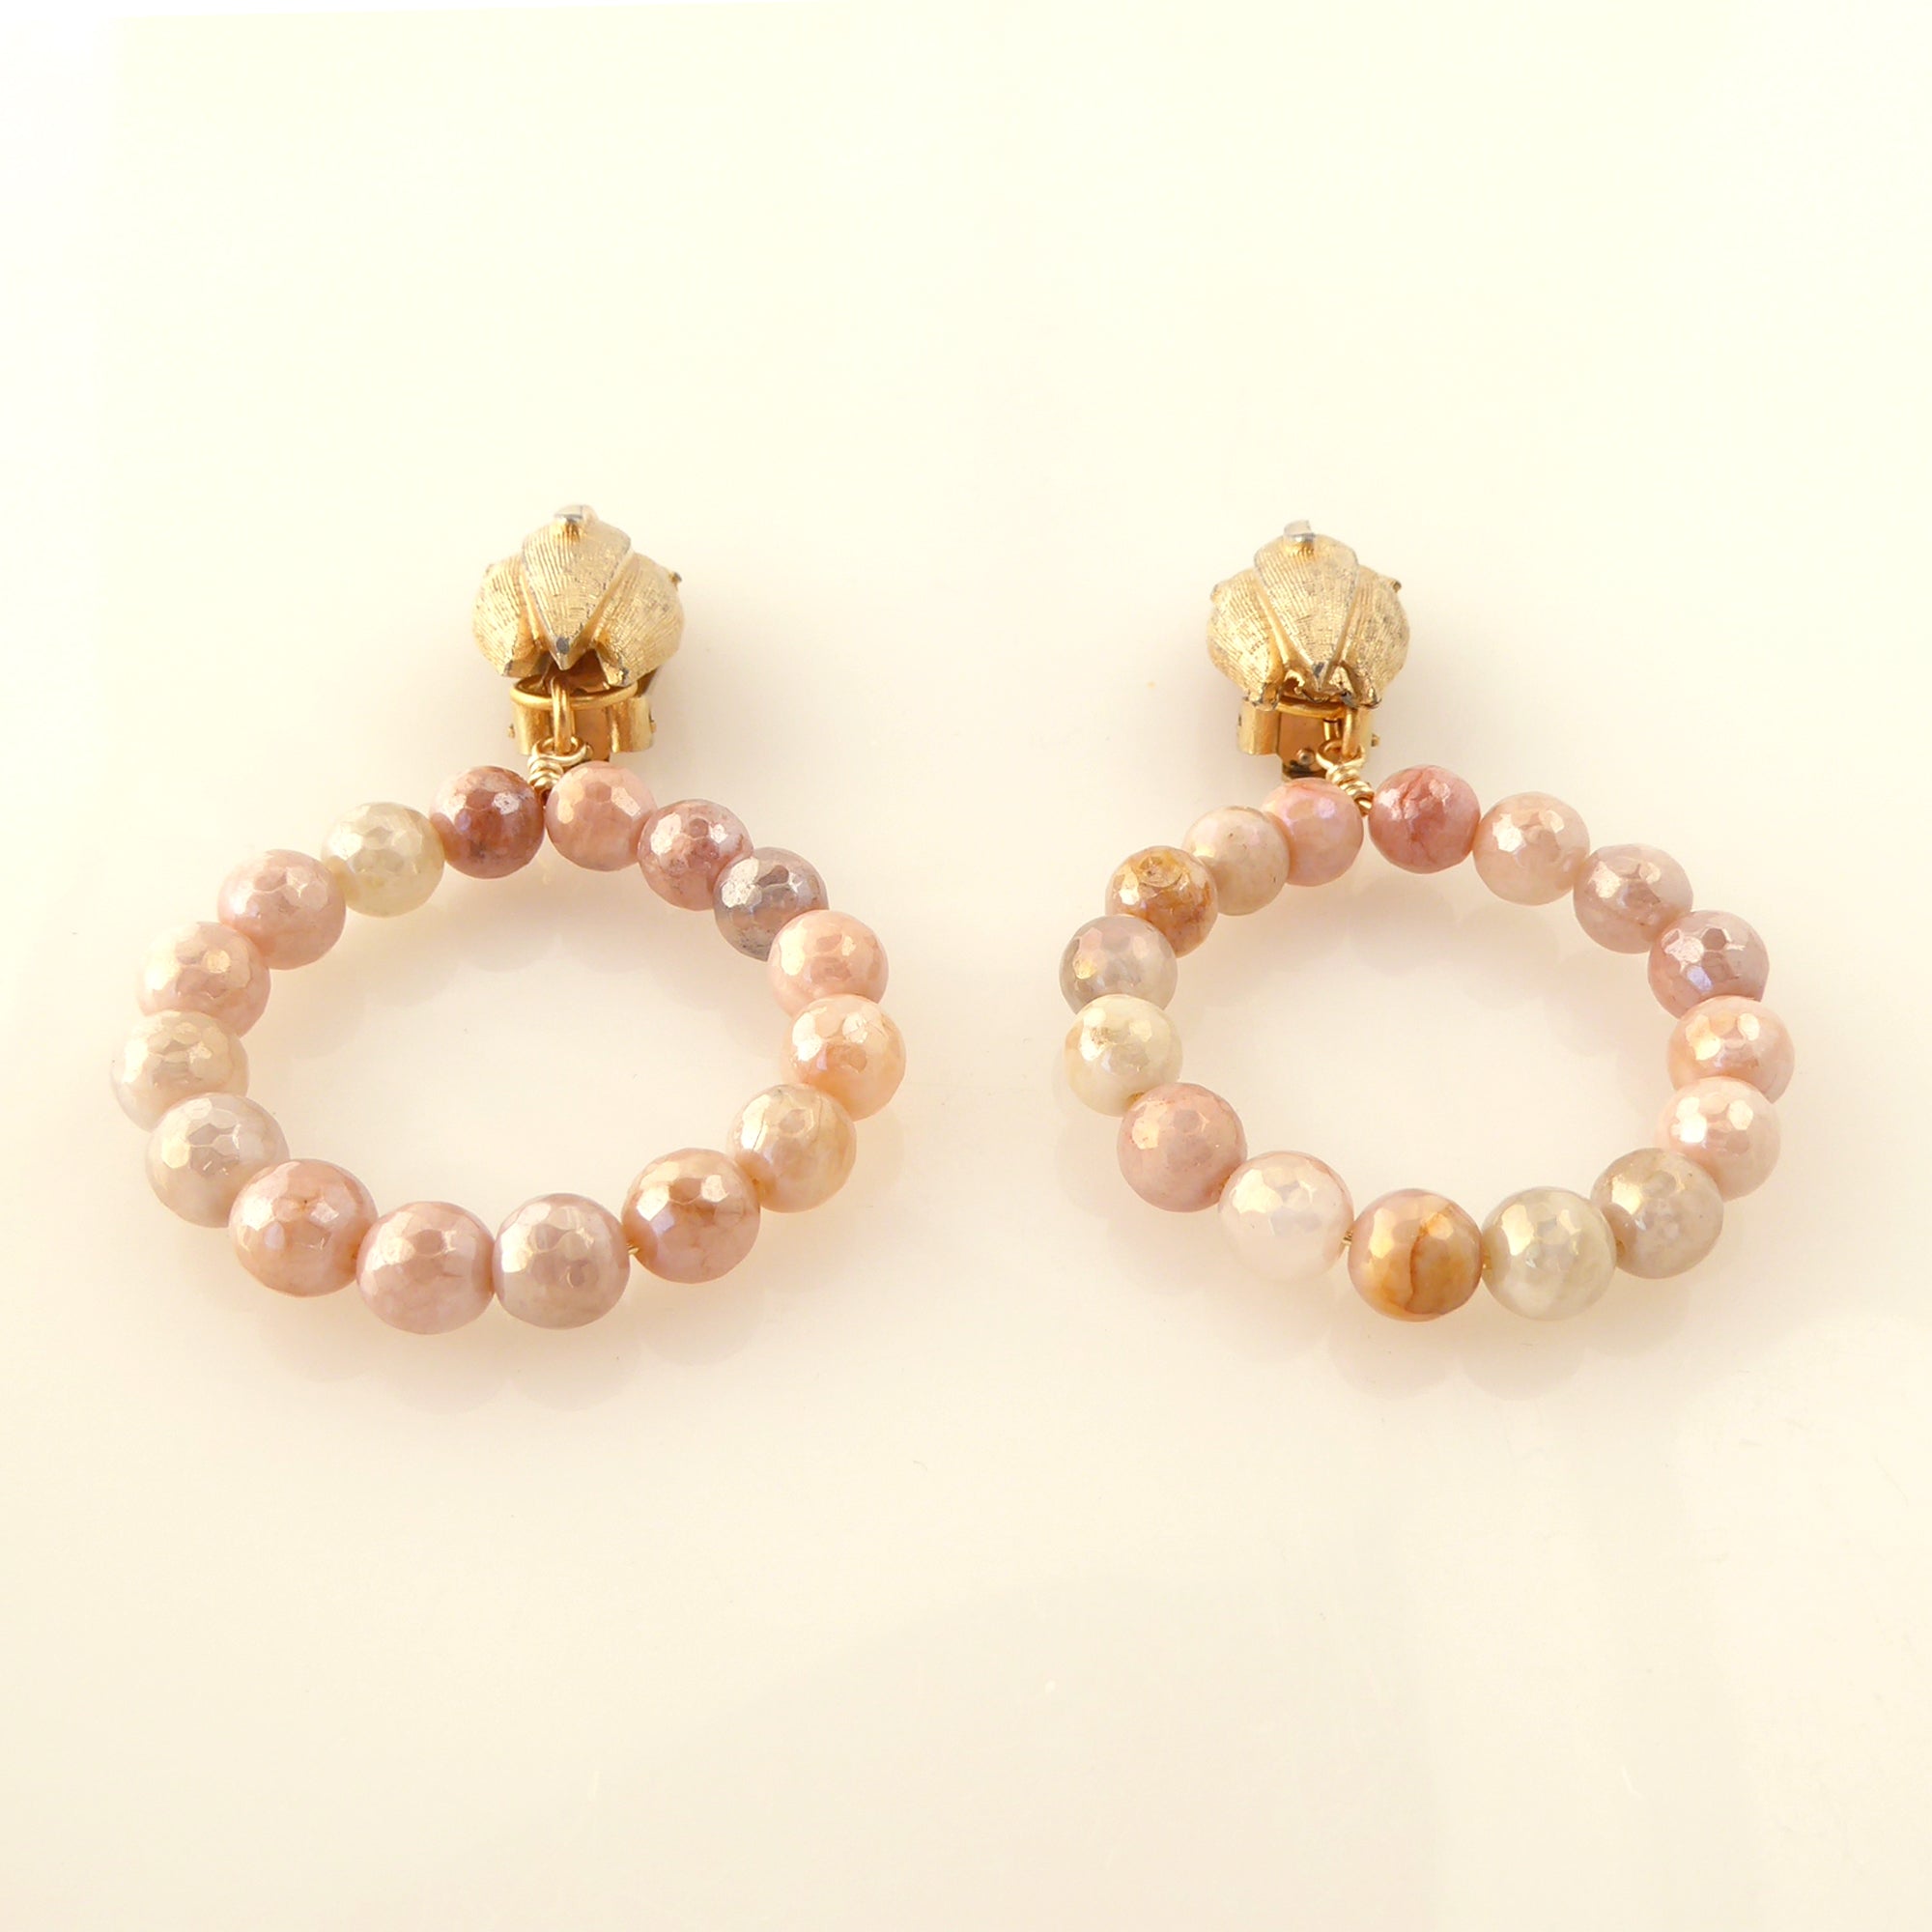 Iridescent peach moonstone earrings by Jenny Dayco 3